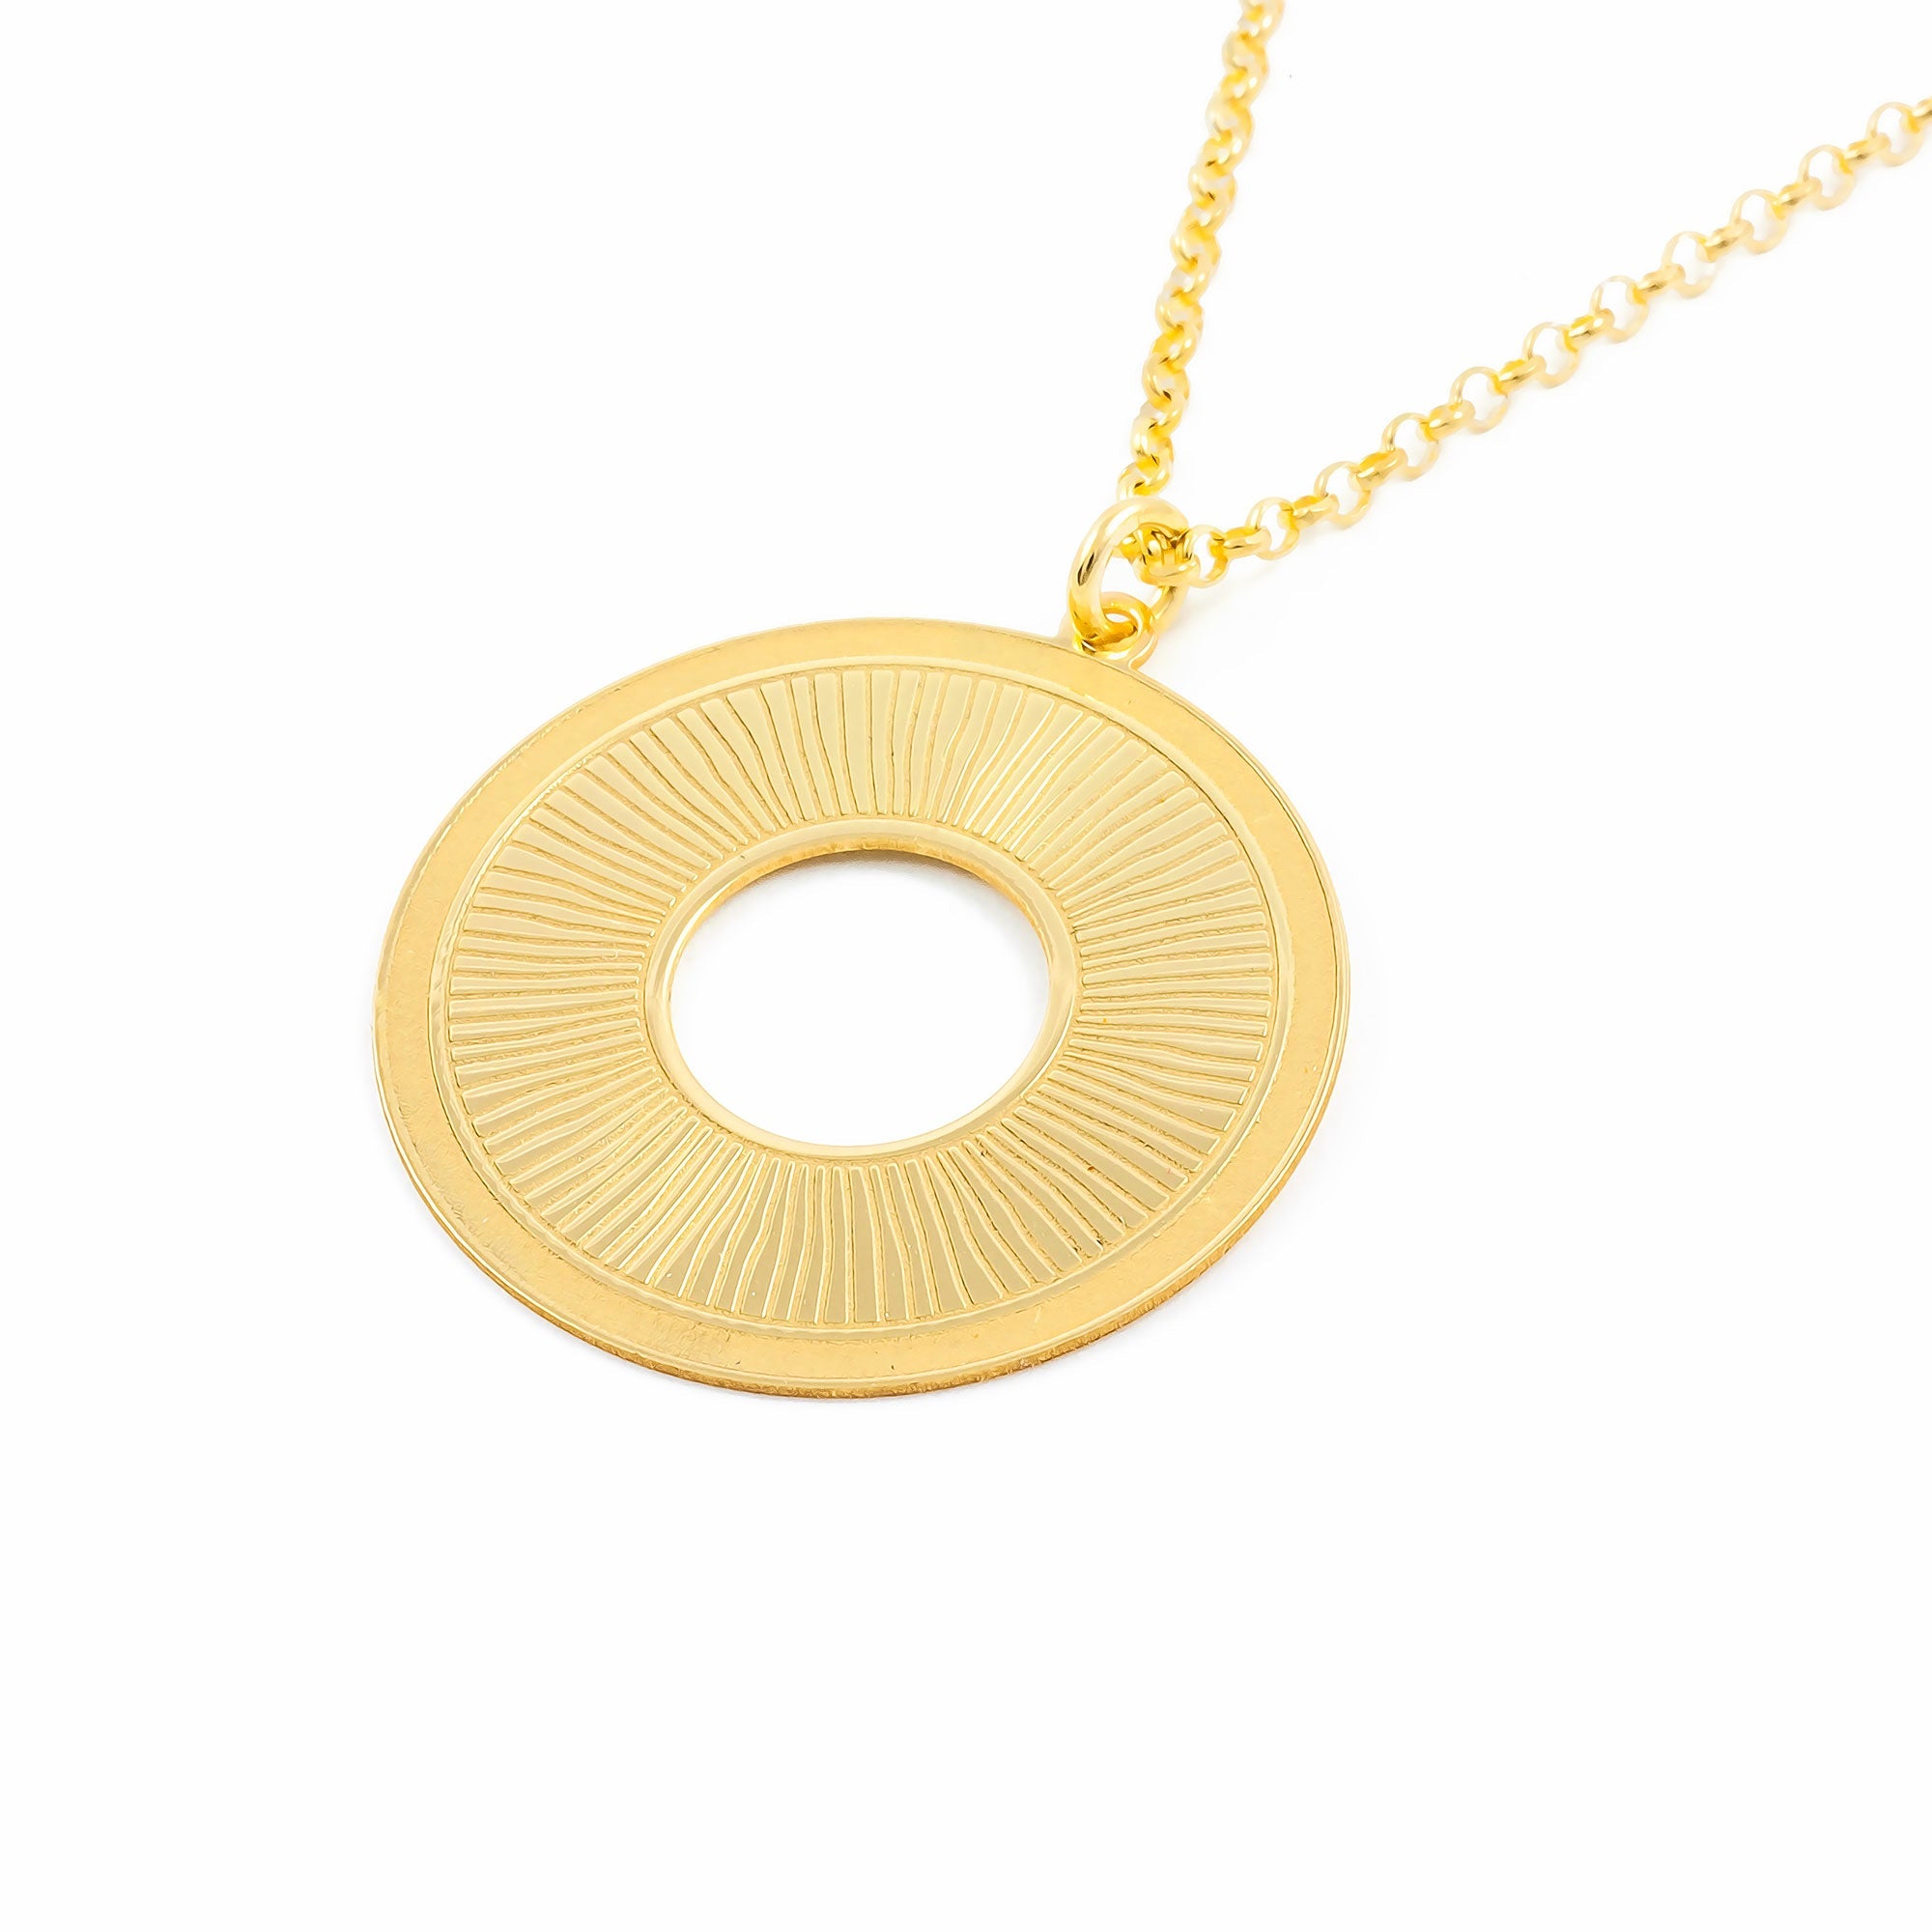 Shiny and Textured Round Golden Sterling Silver Necklace